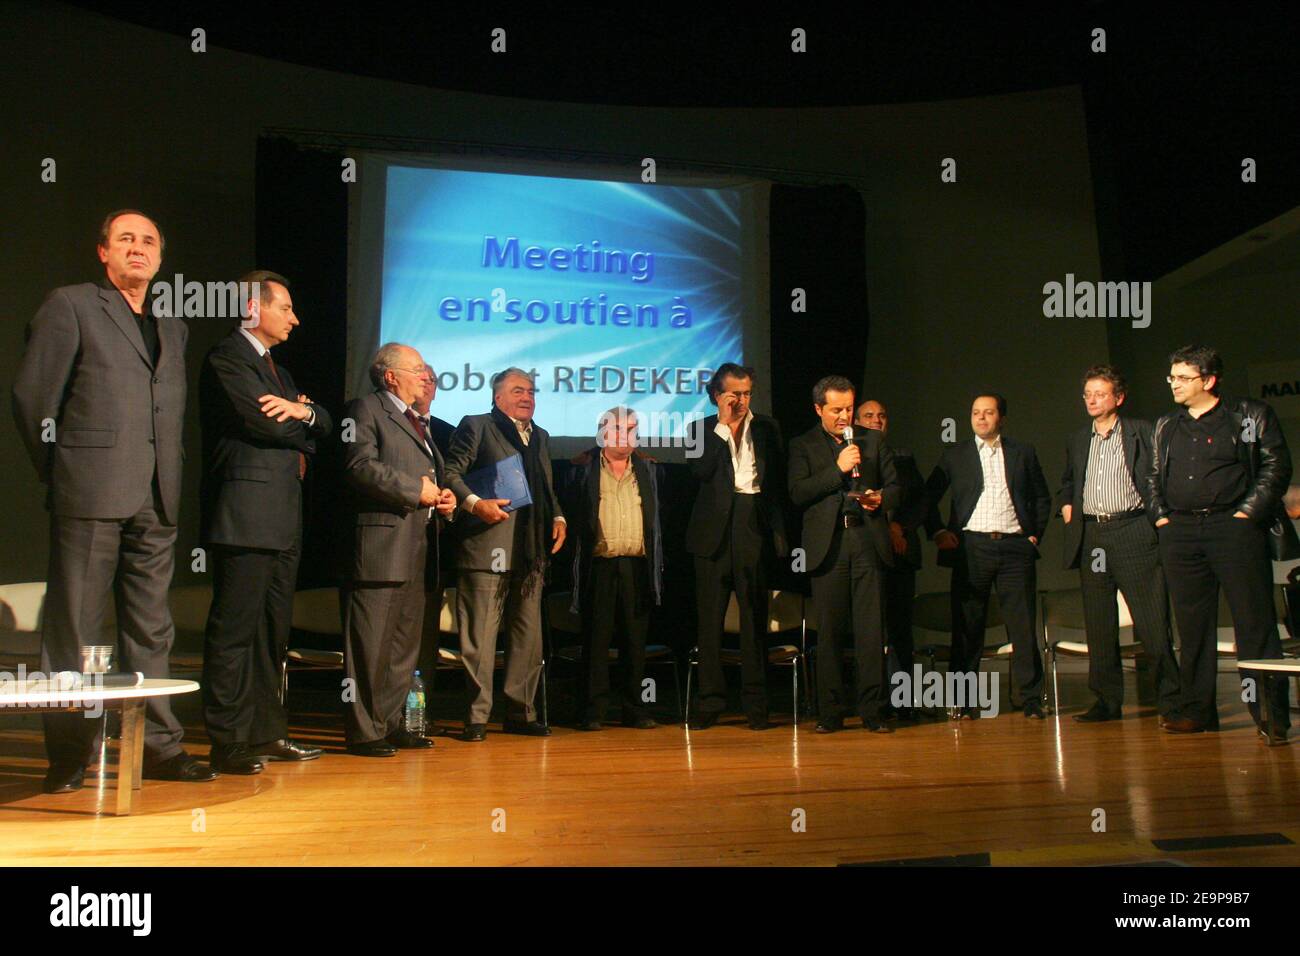 'Jean-Luc Moudenc (Mayor of Toulouse), Roger Cukierman (Crif president), Claude Lanzmann (French Movie director), Robert Redeker , Bernard-Henry Levy (French writer), Philippe Val (Charlie Hebdo's chief editor), Michel Taubmann (''Le Meilleur des mondes'' chief editor), Mohamed Sifaoui (french writer) during the meeting to support Robert Redeker (French Philosophy teacher who has been forced into hiding after making controversial remarks about the Prophet Muhammad and received death threats) at the Mermoz Hall in Toulouse, France, on november 15, 2006. Photo by Manuel Blondeau/ABACAPRESS.COM.' Stock Photo